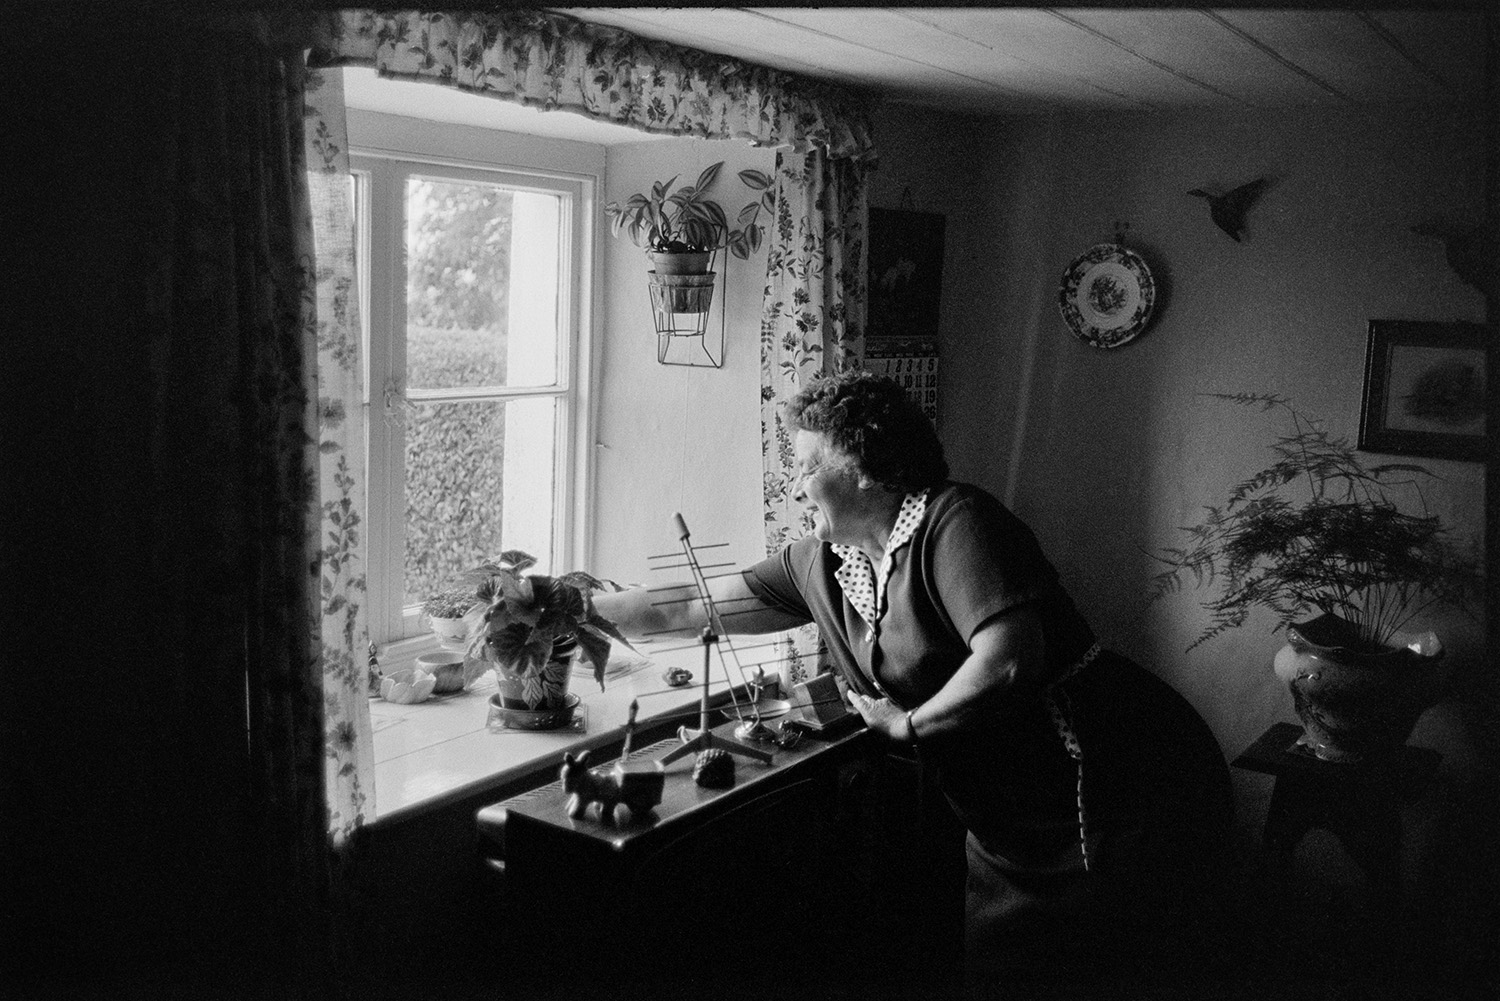 Cottage interior, woman with flowers and sitting at doorway getting ready for show. 
[Mrs Piper checking a pot plant in the window sill of her cottage at Upcott, Dolton, before Dolton Flower Show. Various plants and ornaments are displayed on the walls and sideboard in her living room.]